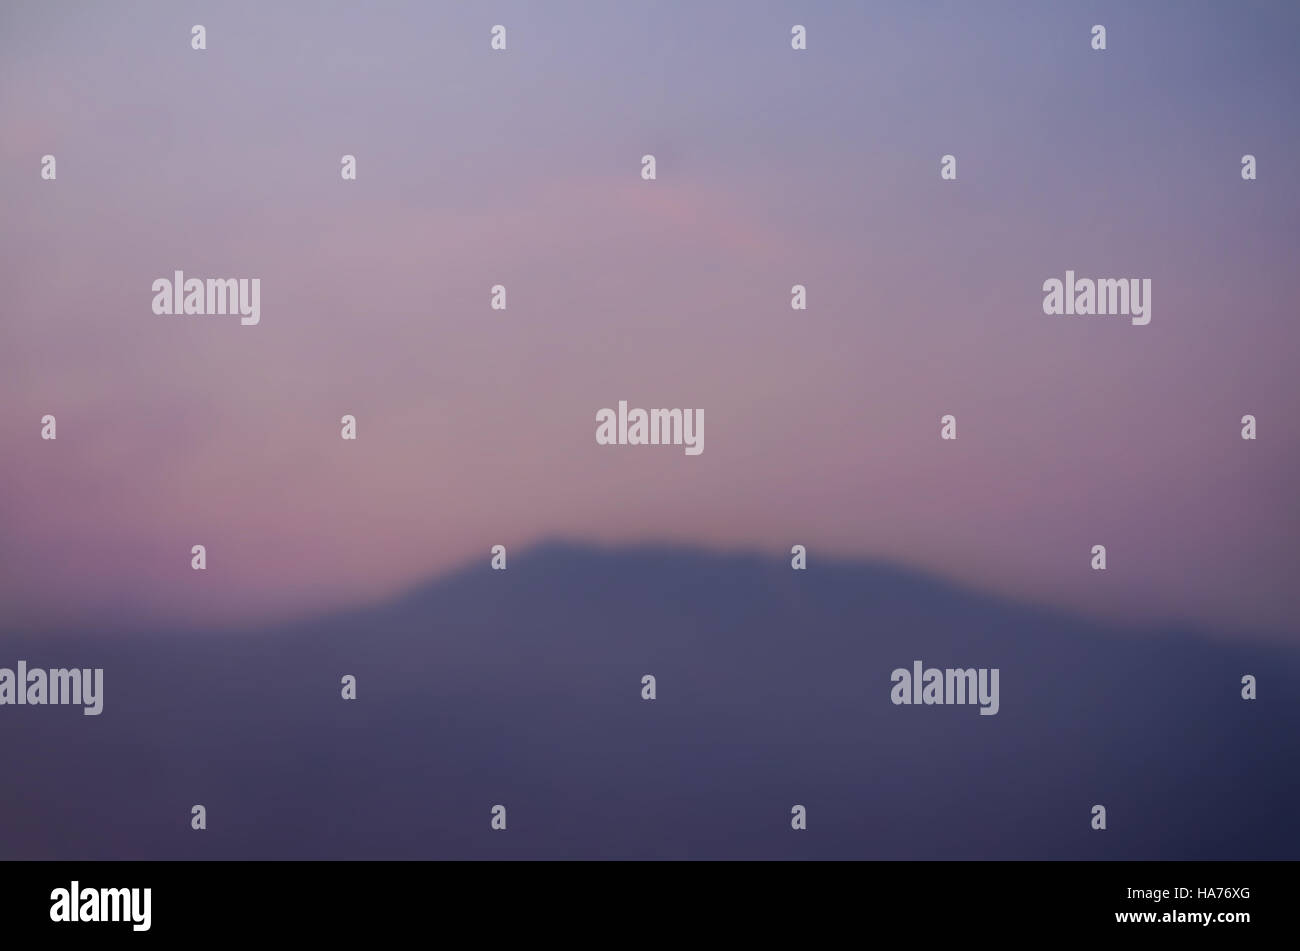 Blurred landscape of mountains with colored sky at sunset or sunrise Stock Photo